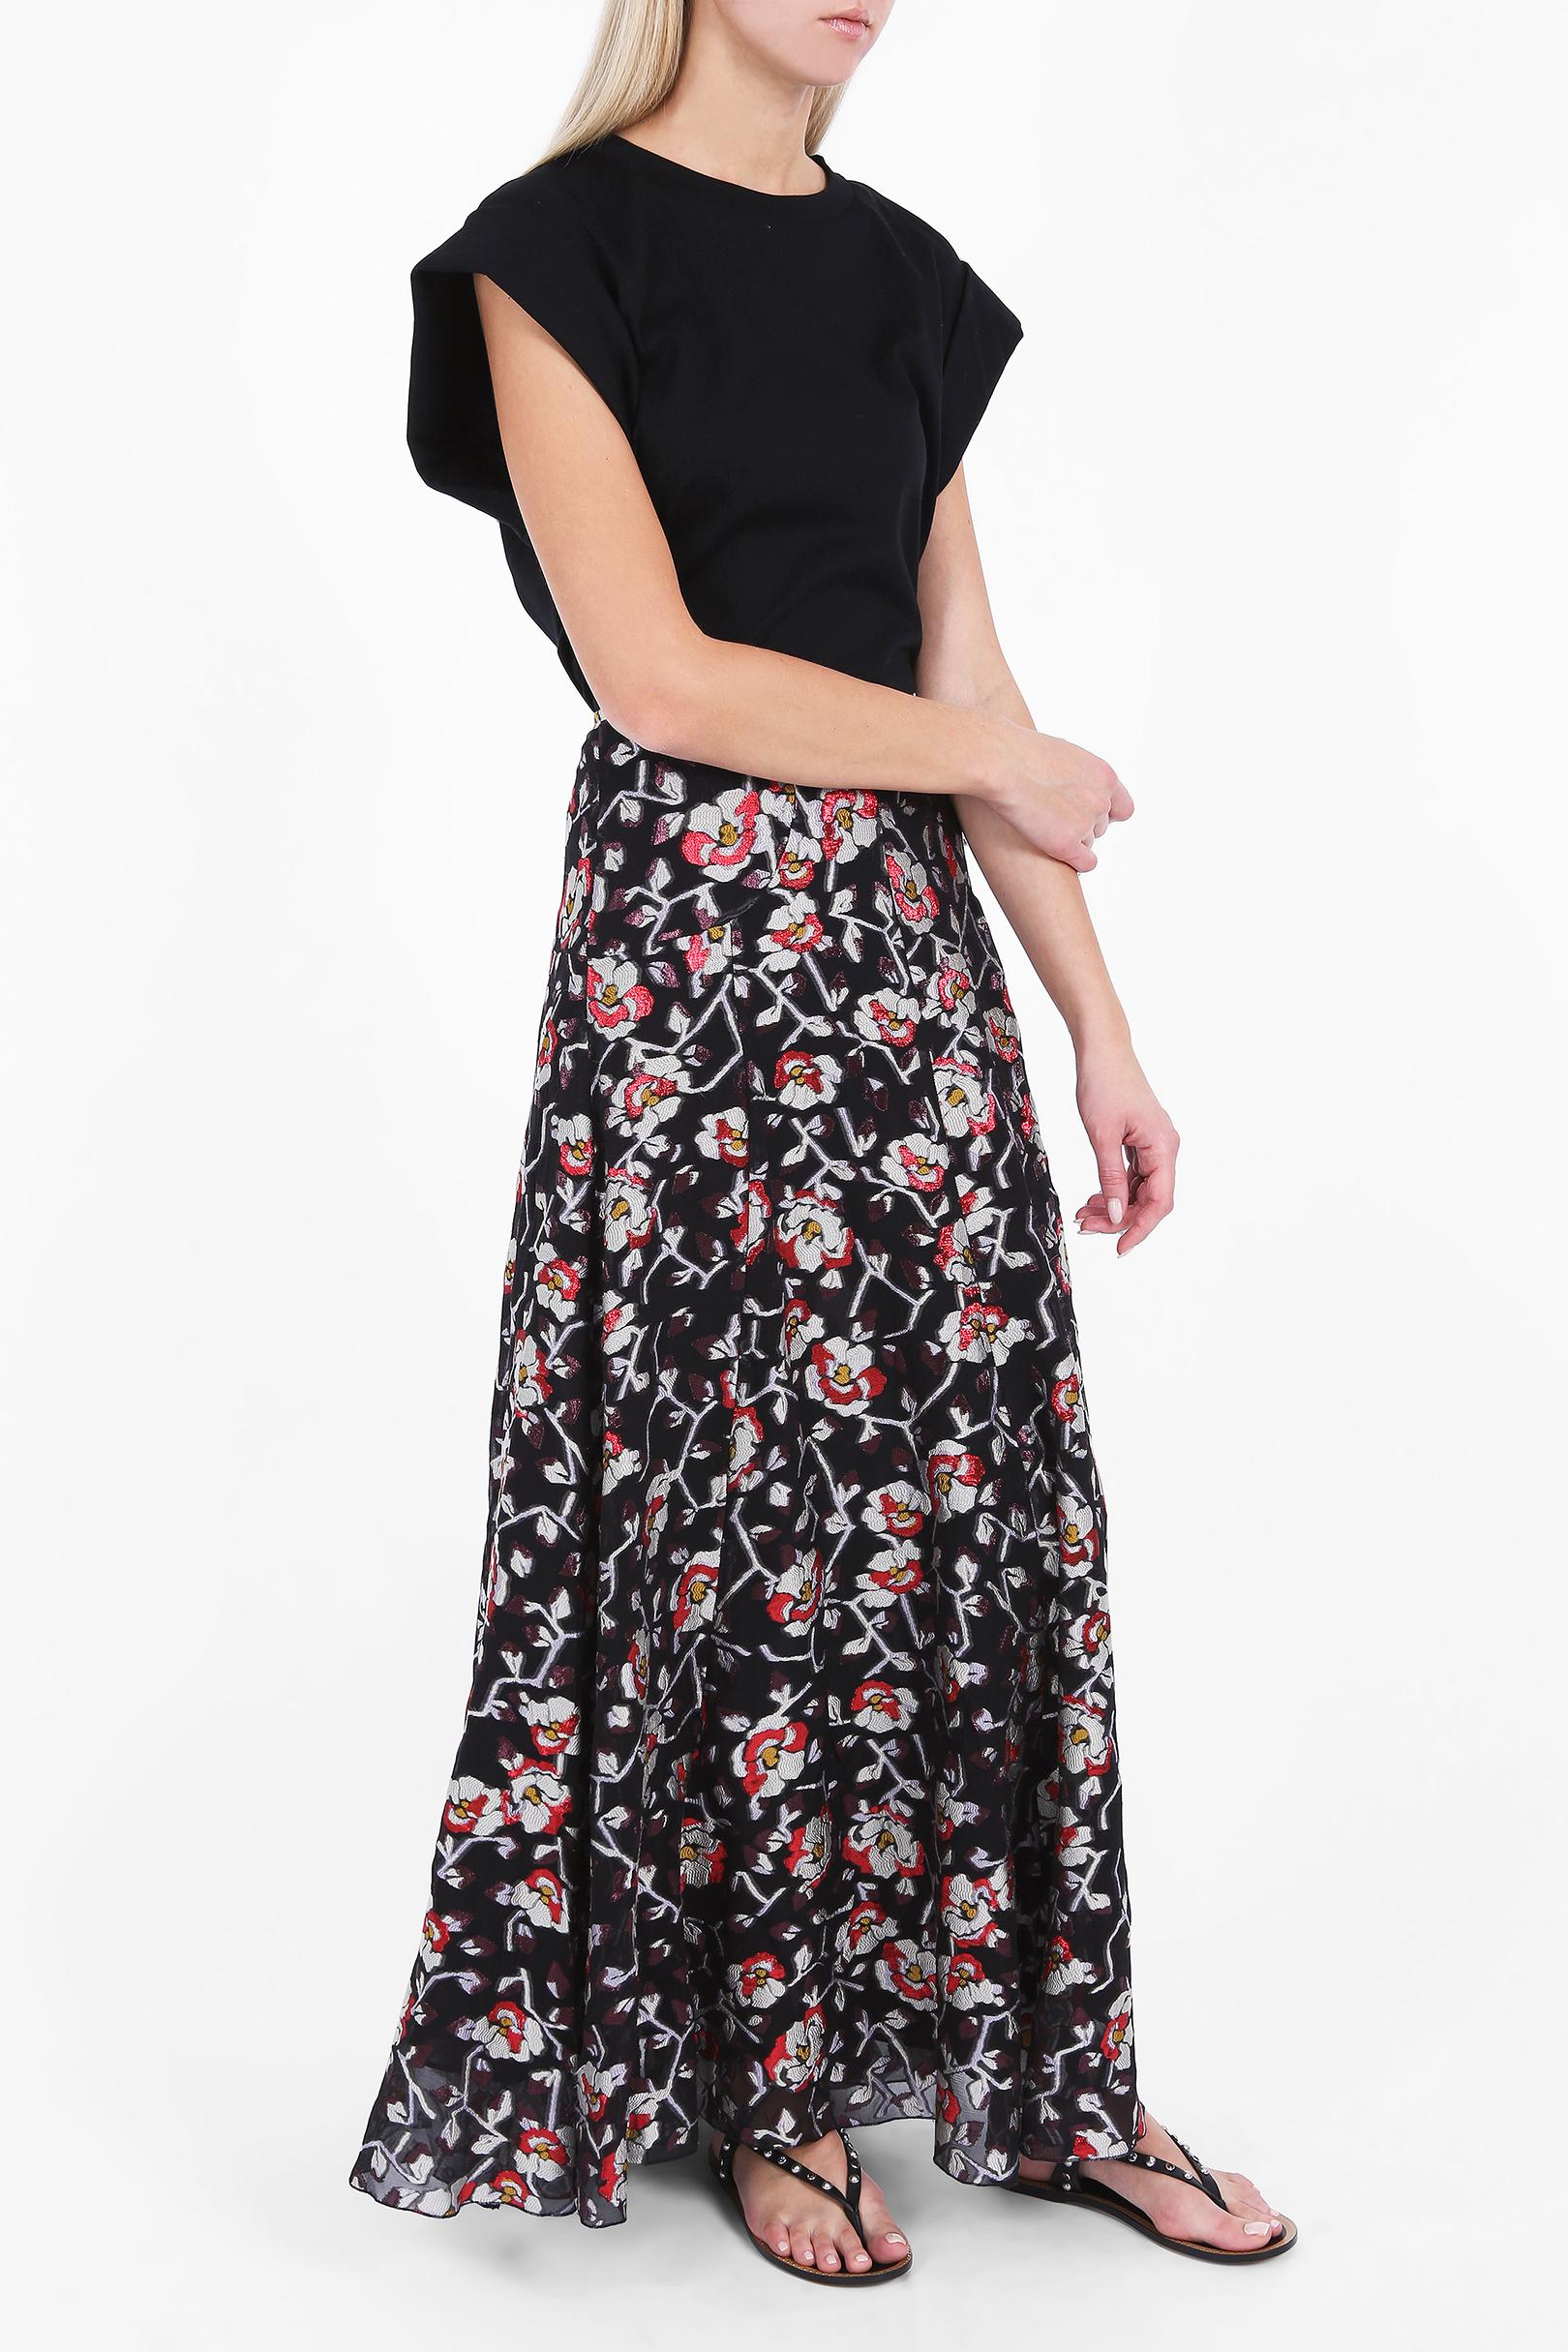 Lyst - Isabel Marant Peace Floral Skirt in Black